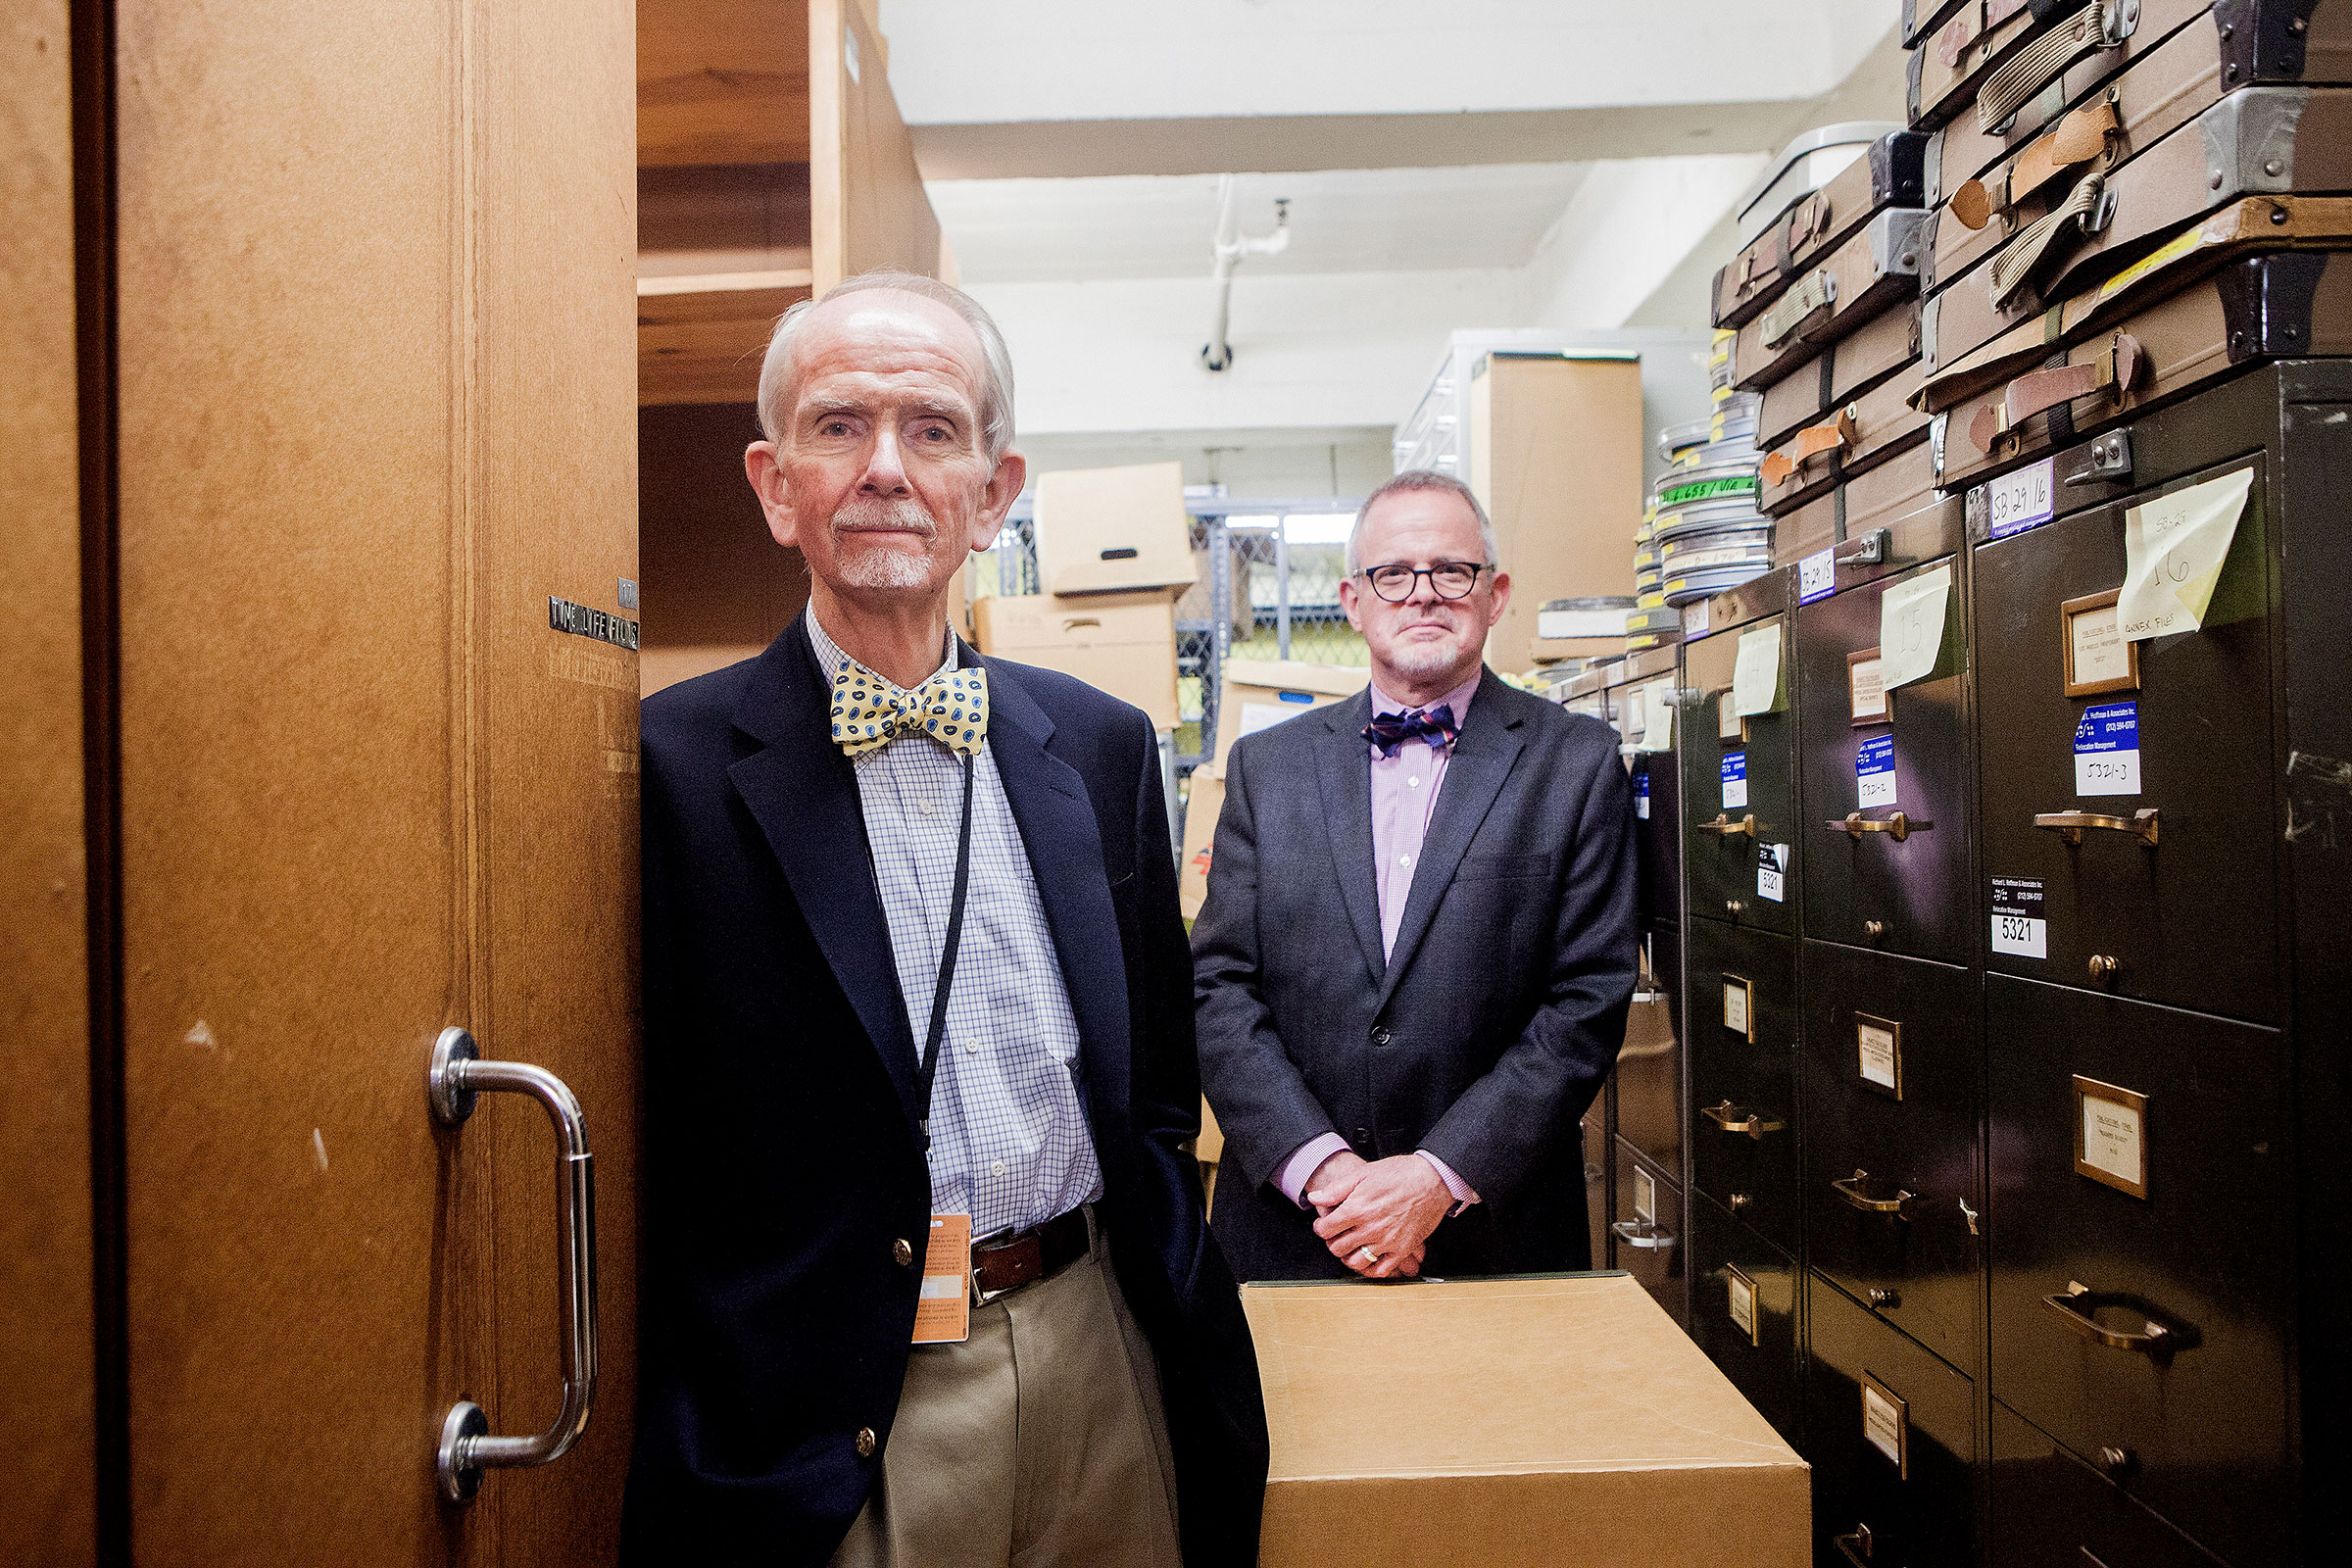 Bill Hooper, the Time Inc. archivist, right, and Michael Ryan, left, the library director of the New-York Historical Society, in the Time-Life archive storage space in New York, Nov. 4, 2015. (Sam Hodgson—The New York Times/Redux)